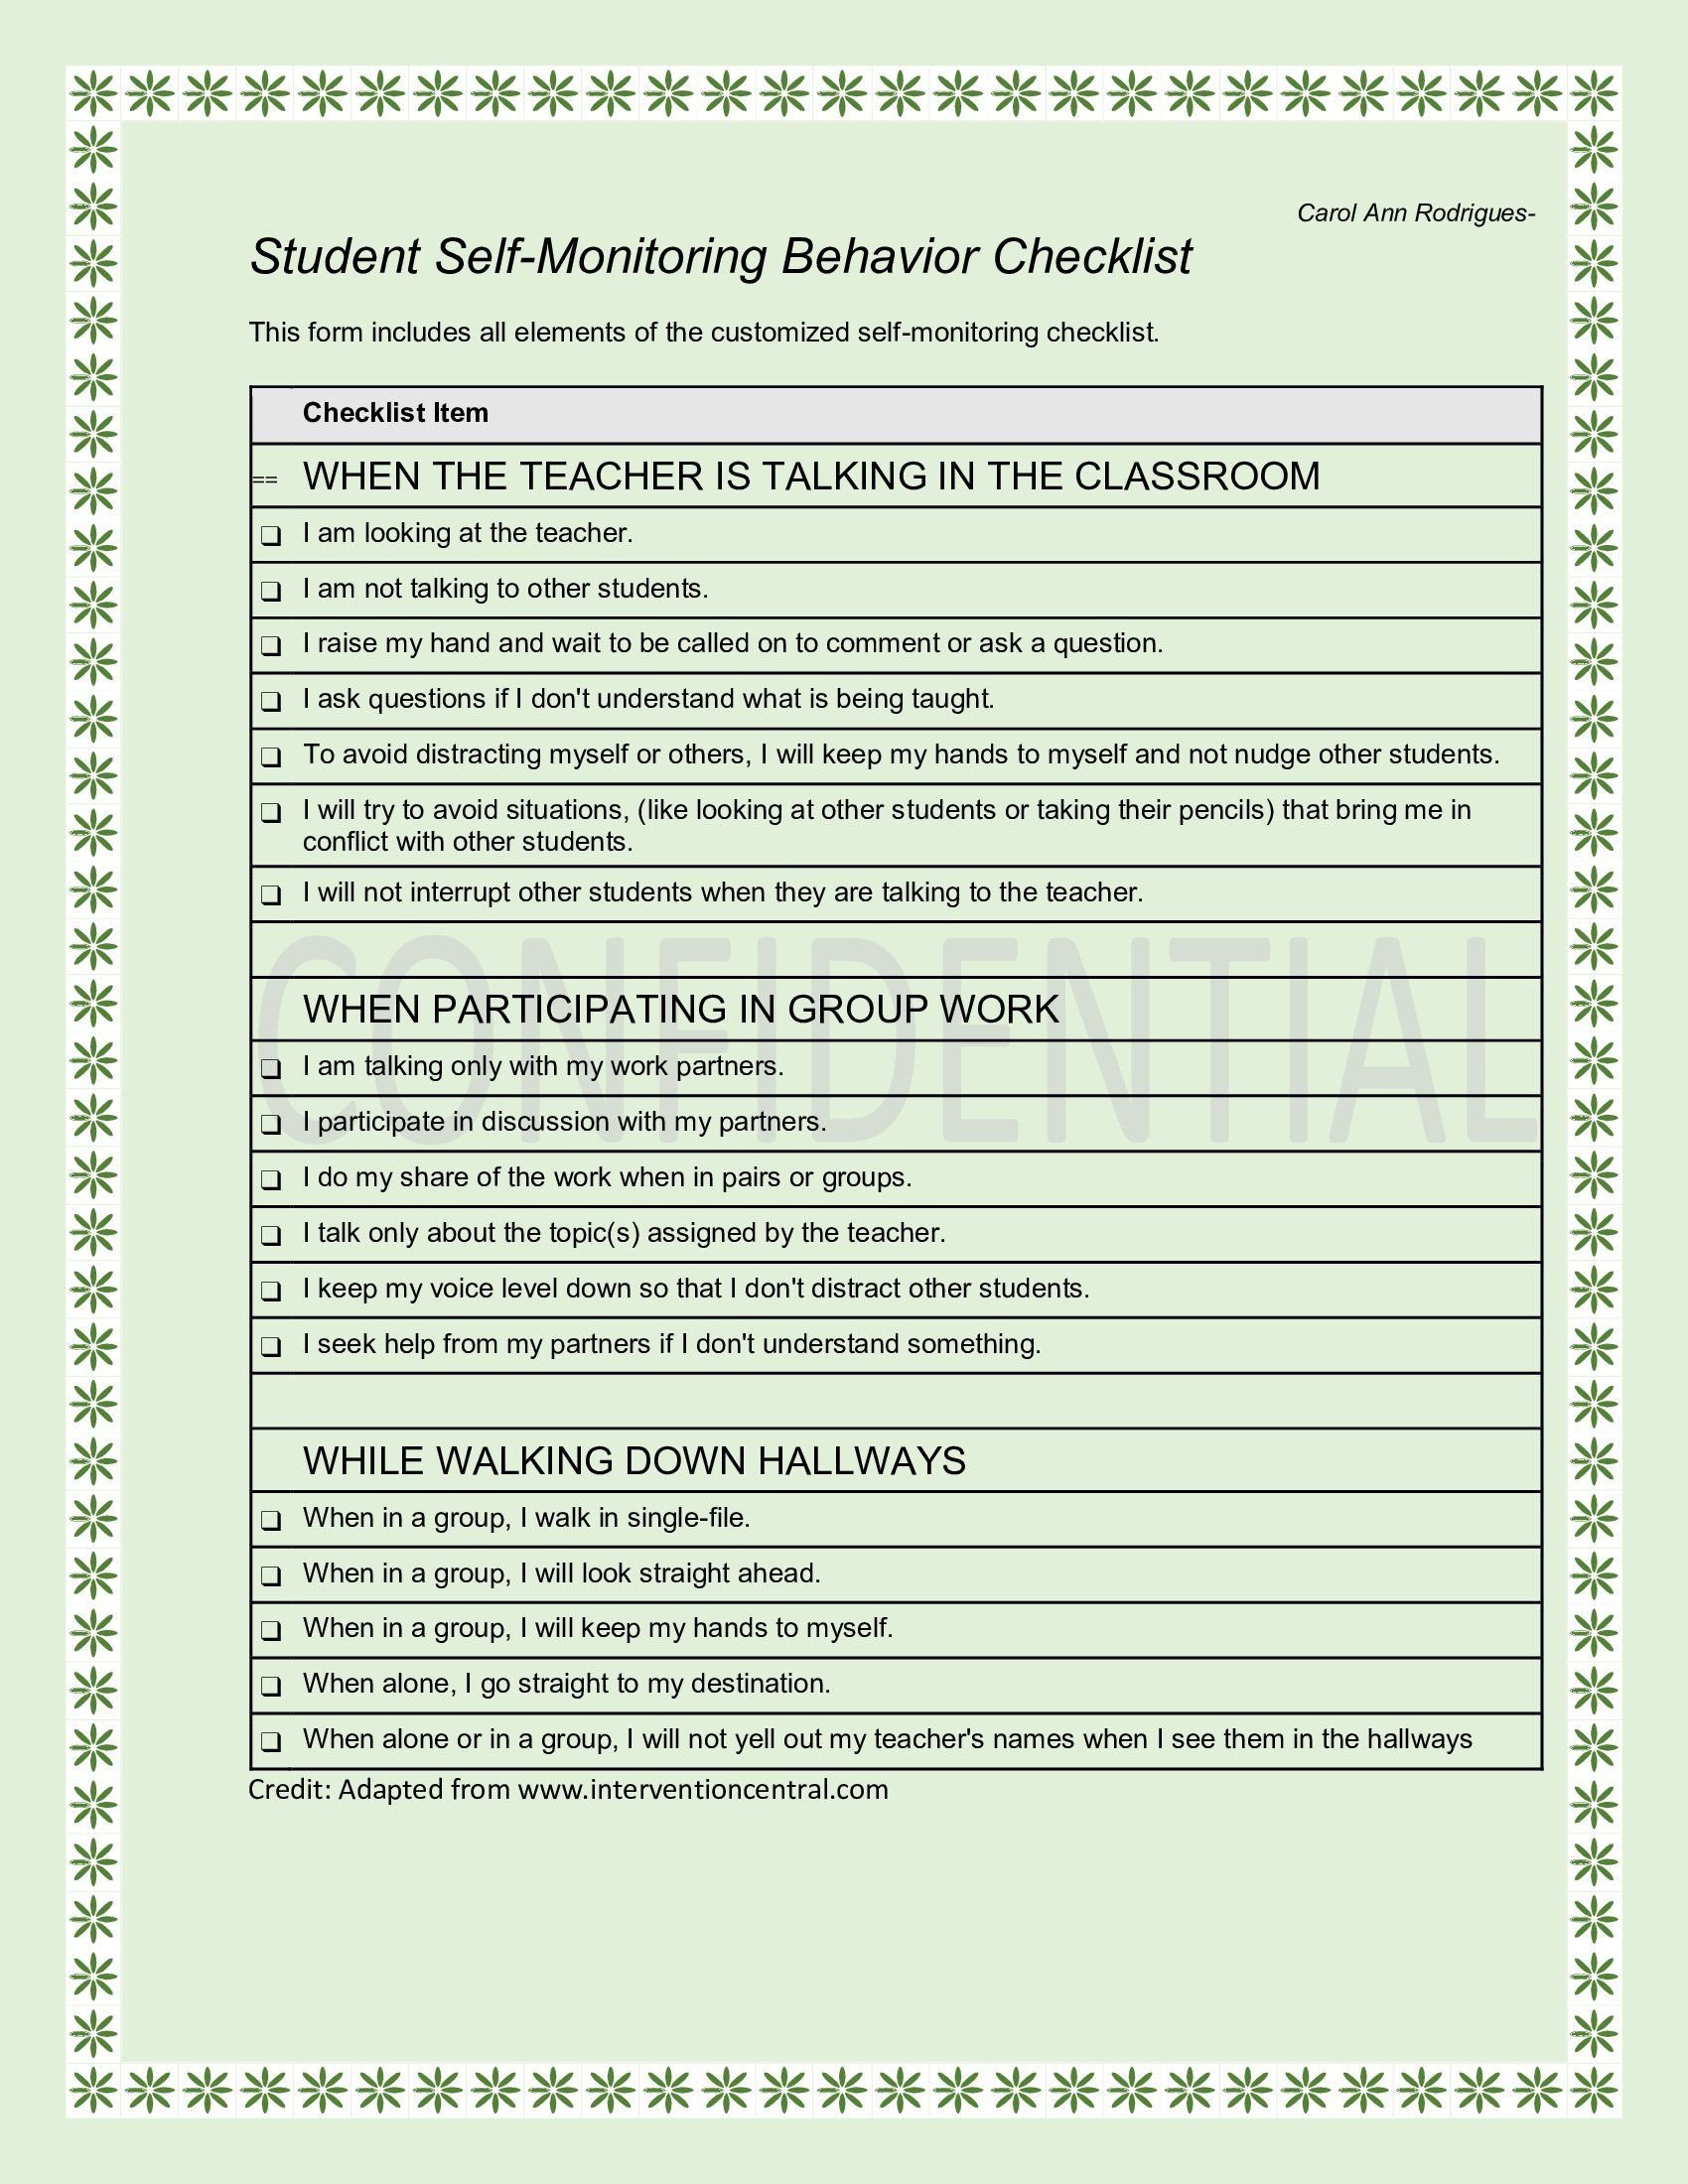 Behavior Checklist for Students This is the Self Monitoring Behavior Checklist I Made for